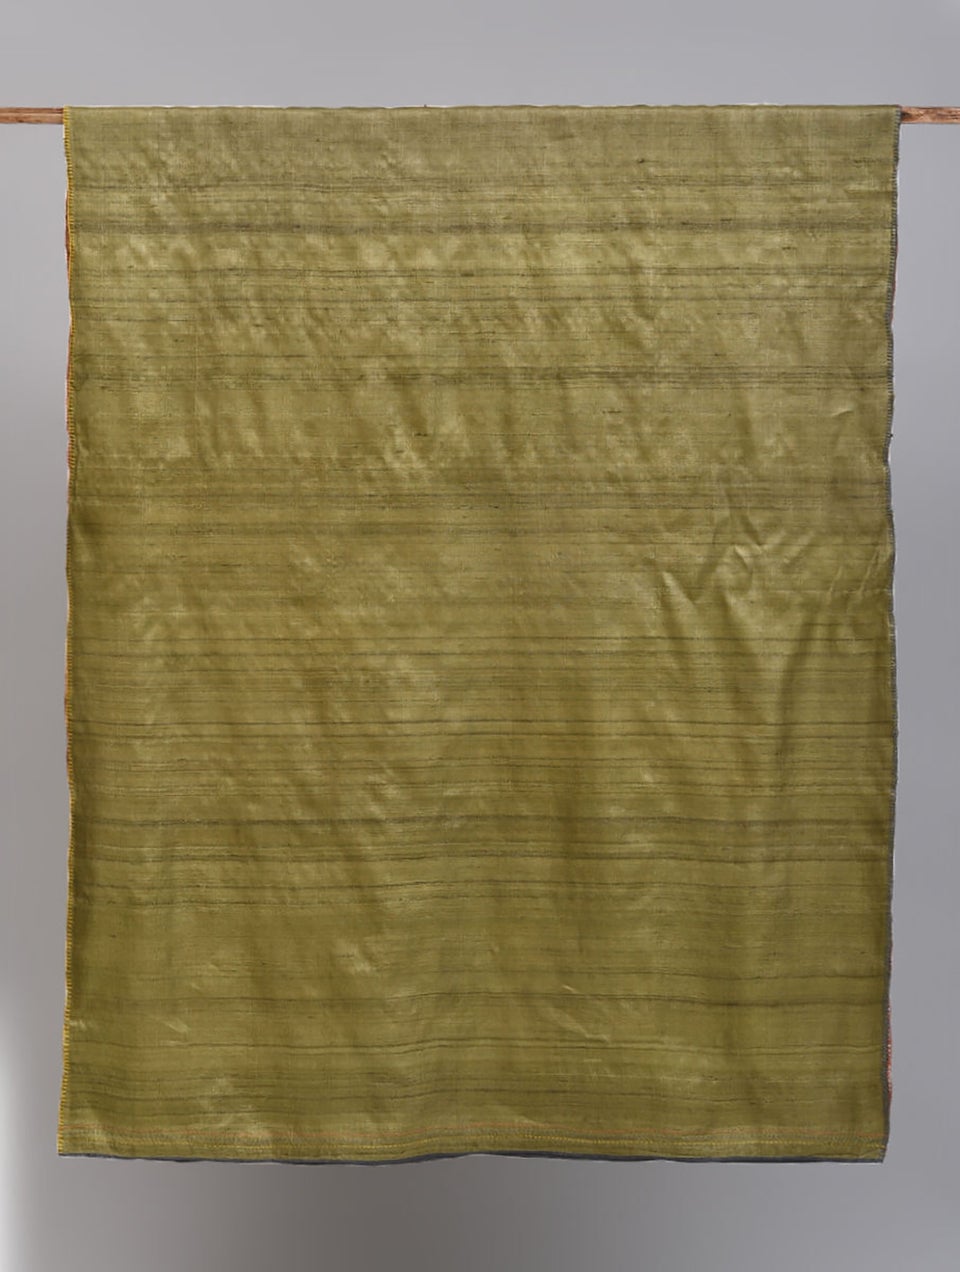 Women Olive Handwoven Tussar Silk Dupatta With Hand Embroidery